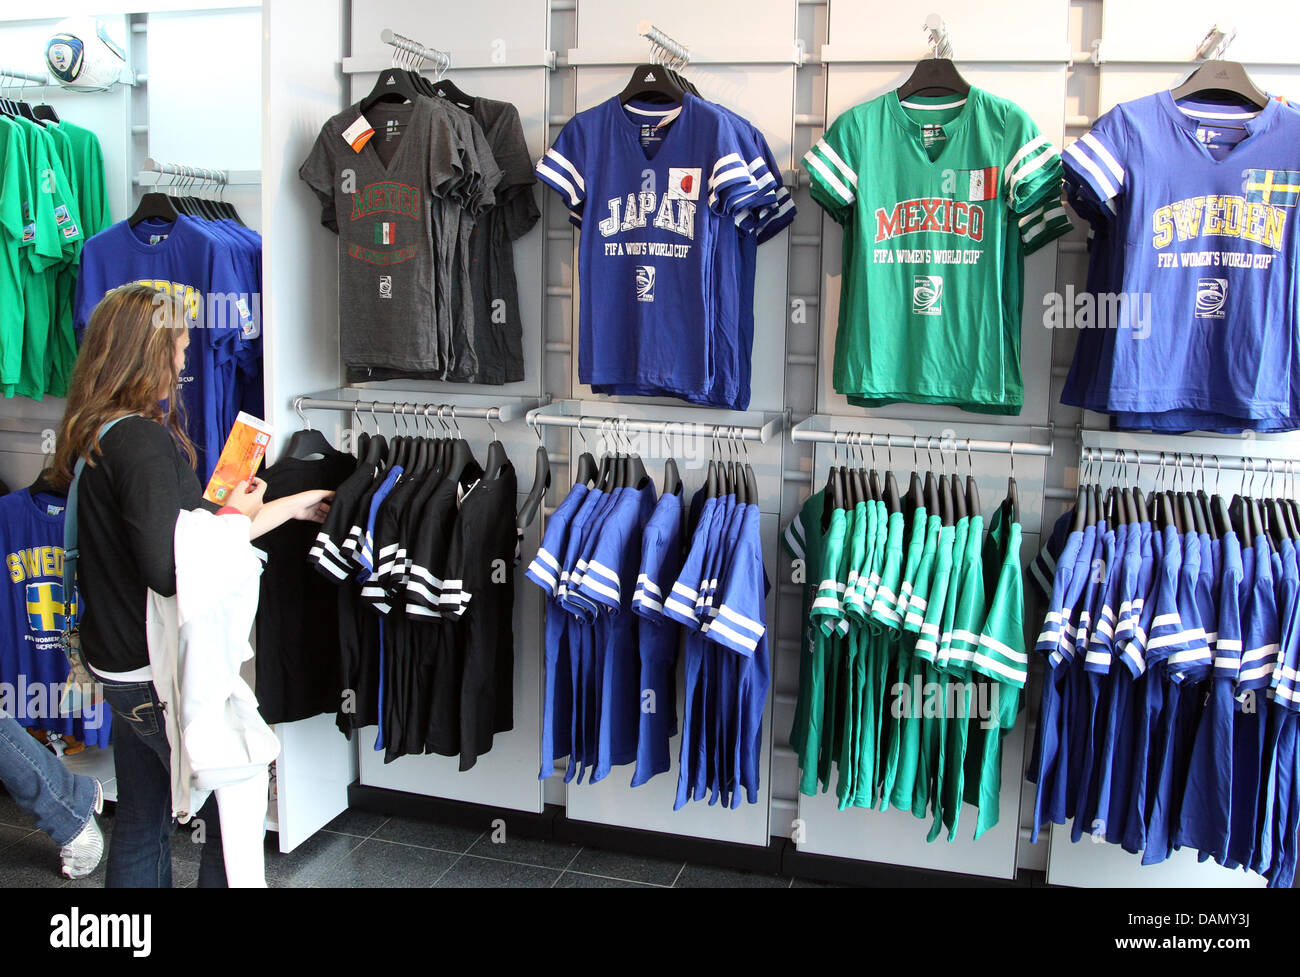 Official merchandise store with jerseys of the Women's World Cup prior to  the Group B match Japan against Mexico of FIFA Women's World Cup soccer  tournament at the FIFA Women's World Cup